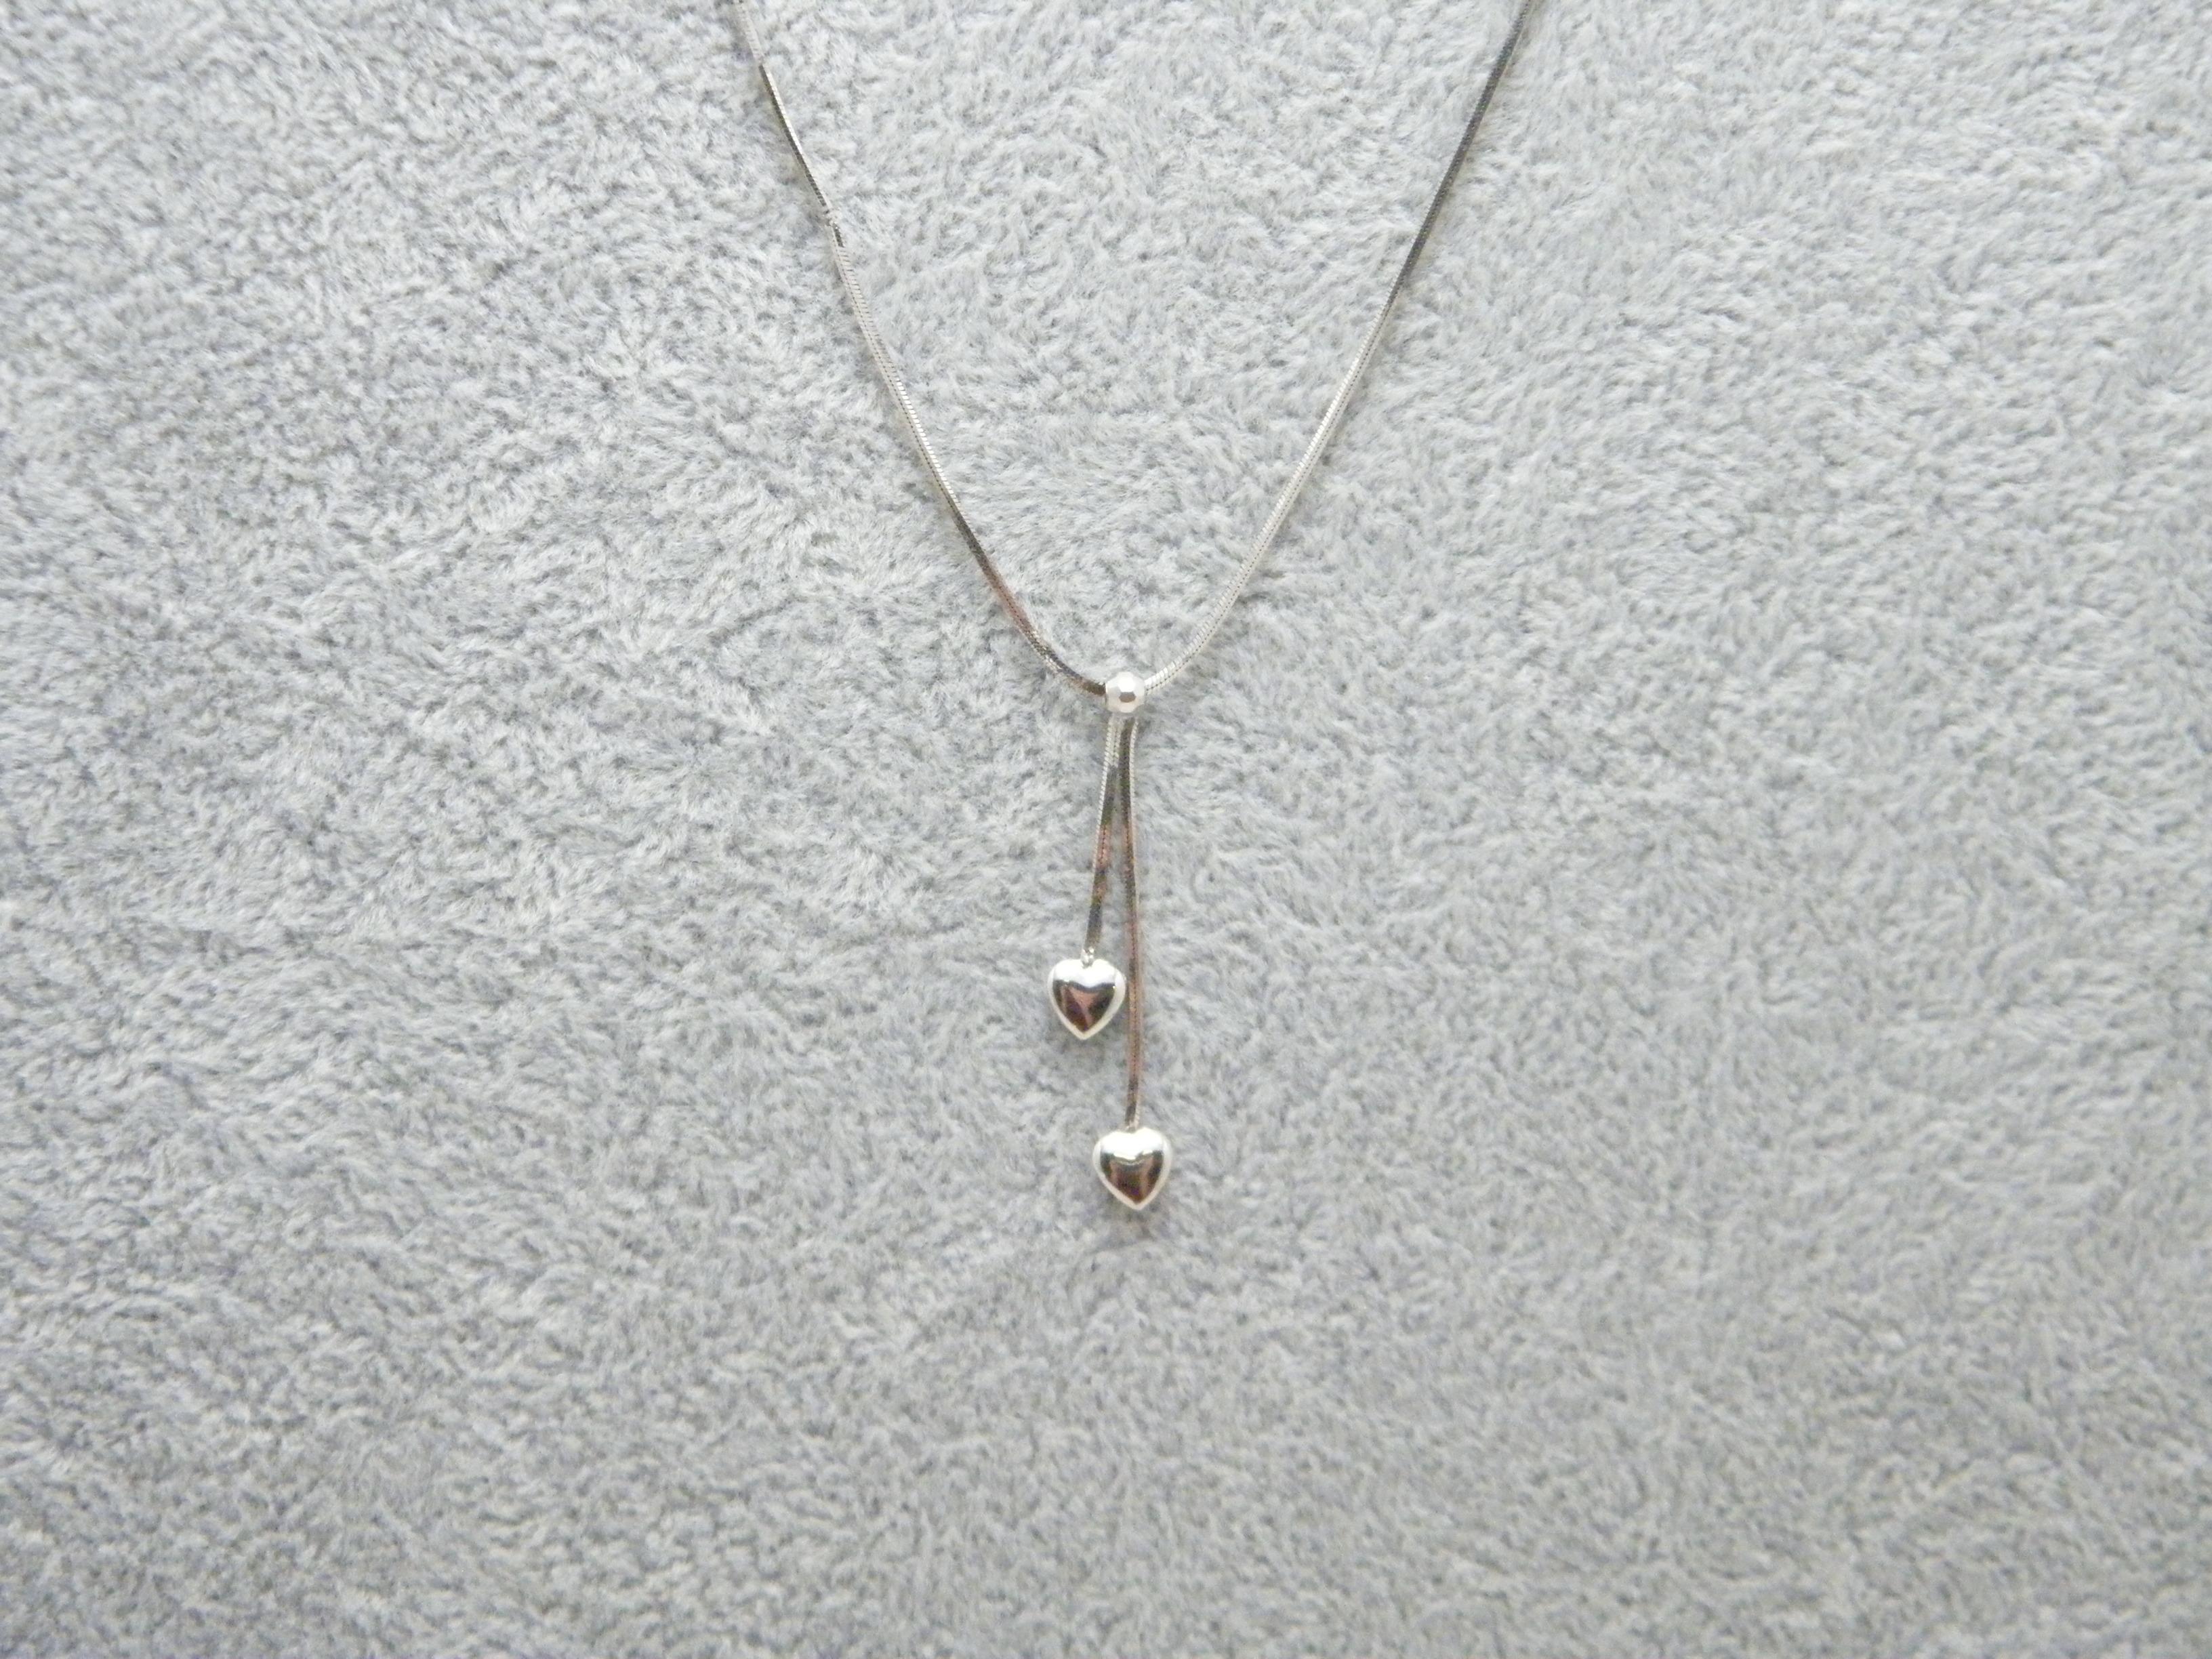 If you have landed on this page then you have an eye for beauty.

On offer is this gorgeous

9CT WHITE GOLD TWIN LARIAT HEART PENDANT NECKLACE

PENDANT DESCRIPTION
DETAILS
Material: Solid 9ct (375/000) white gold
Style: Classic Lariat style twin